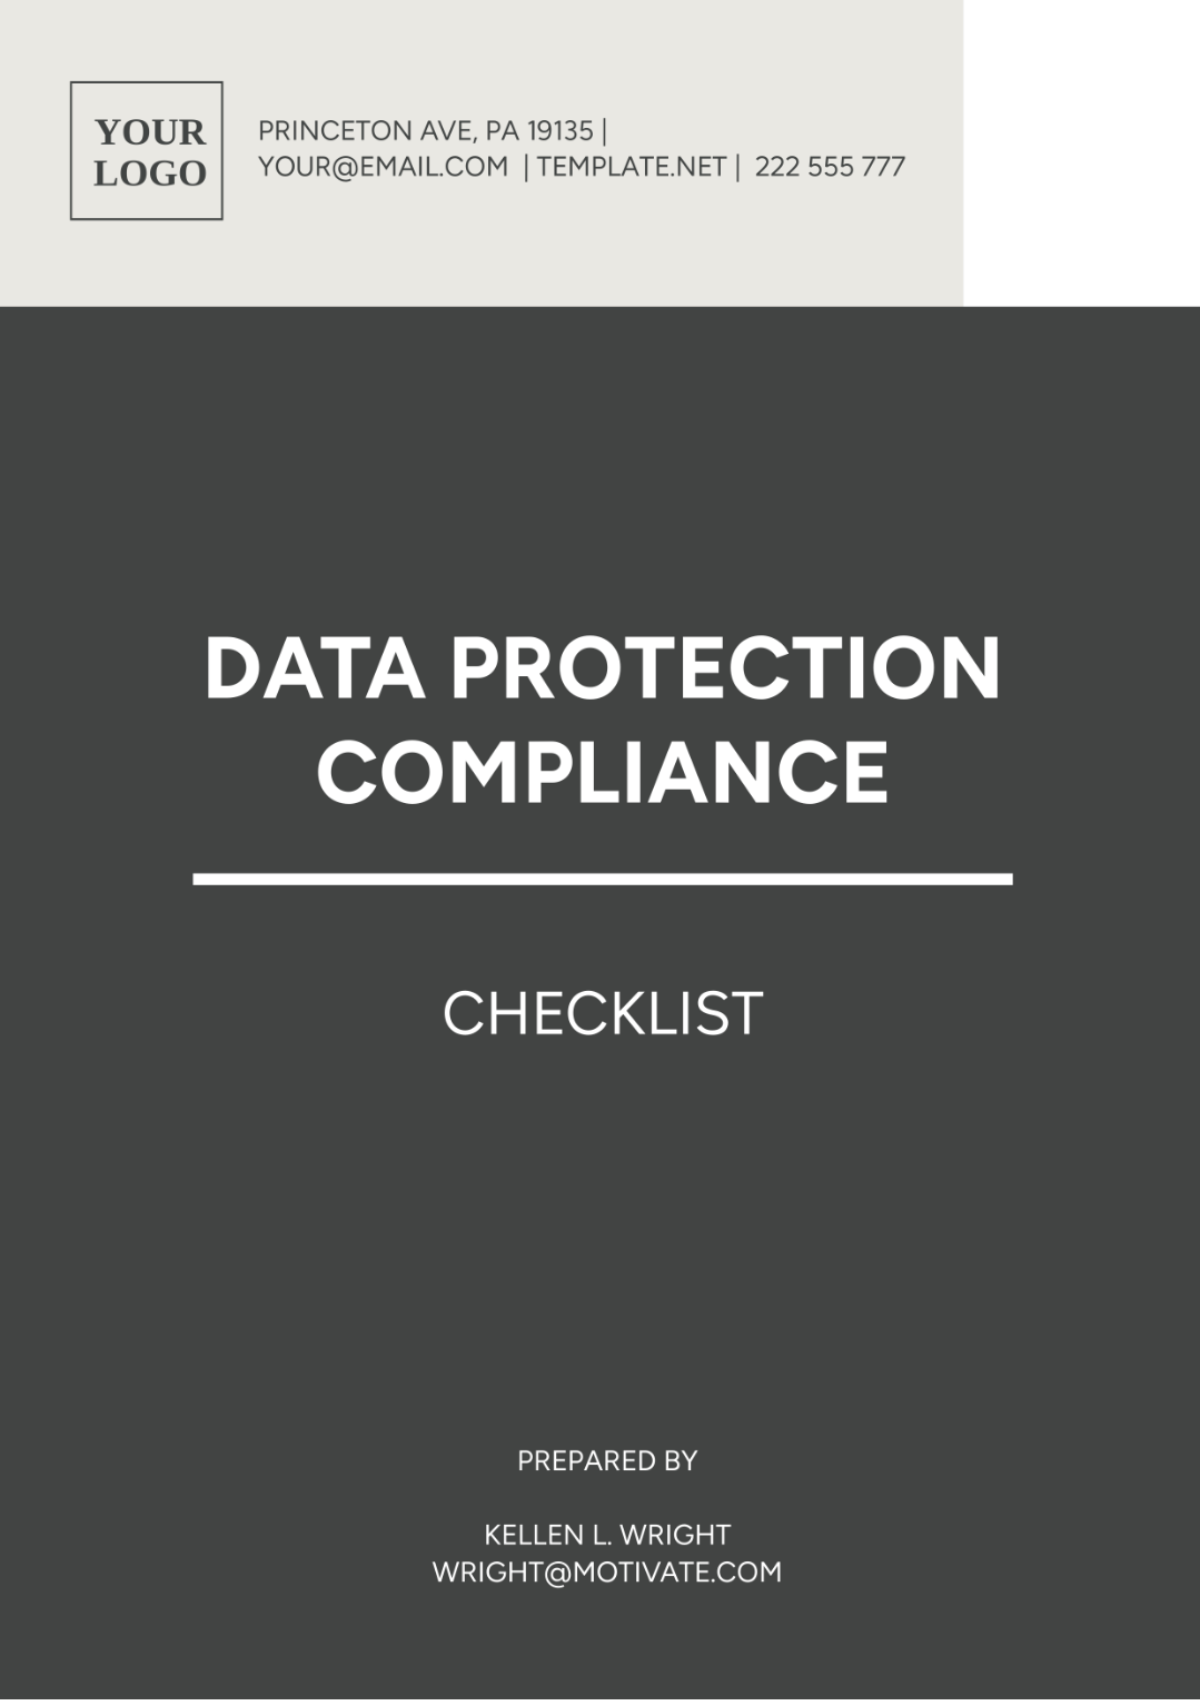 Data Protection Compliance Checklist Template